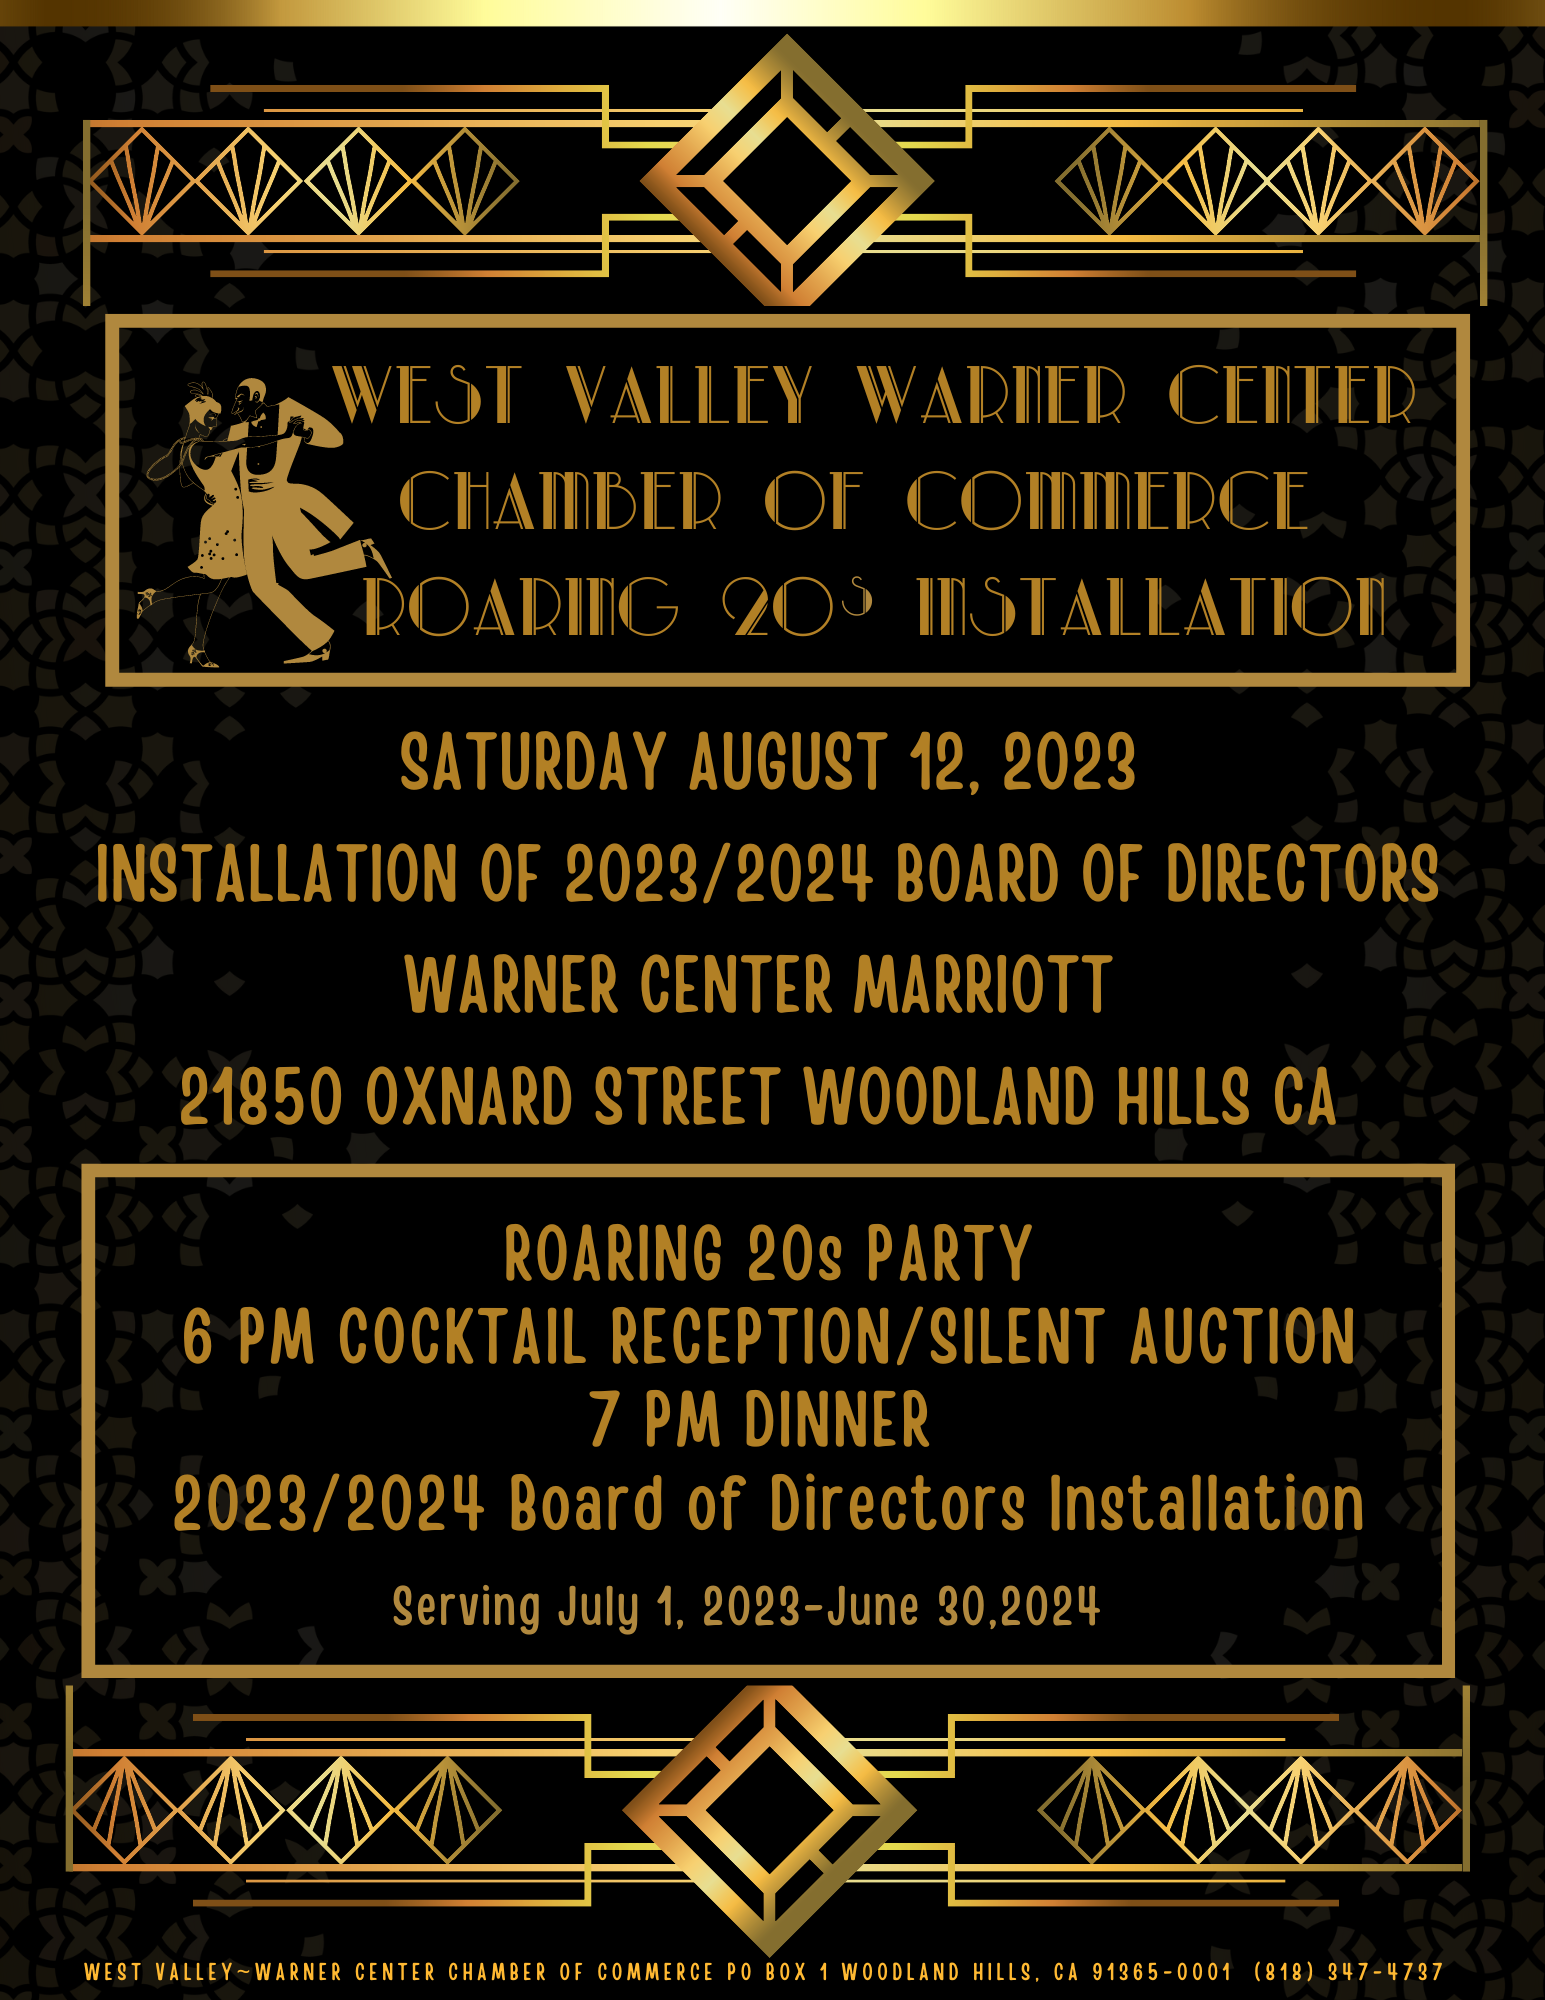 West Valley Warner Center Chamber of Commerce